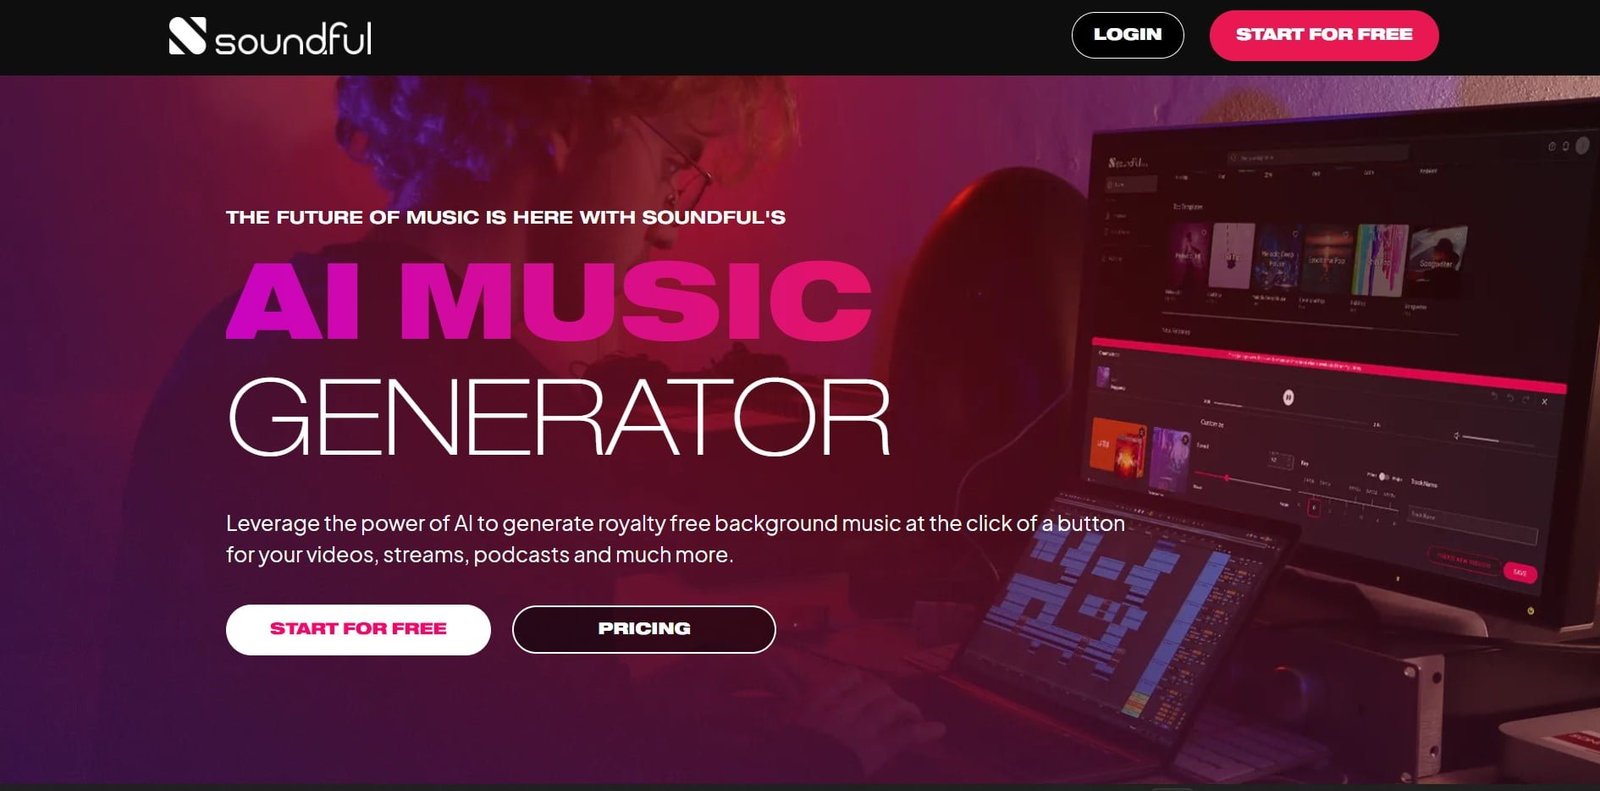 Soundful is an innovative AI music generator to create royalty-free music without copyright issues or overpaying for music licenses